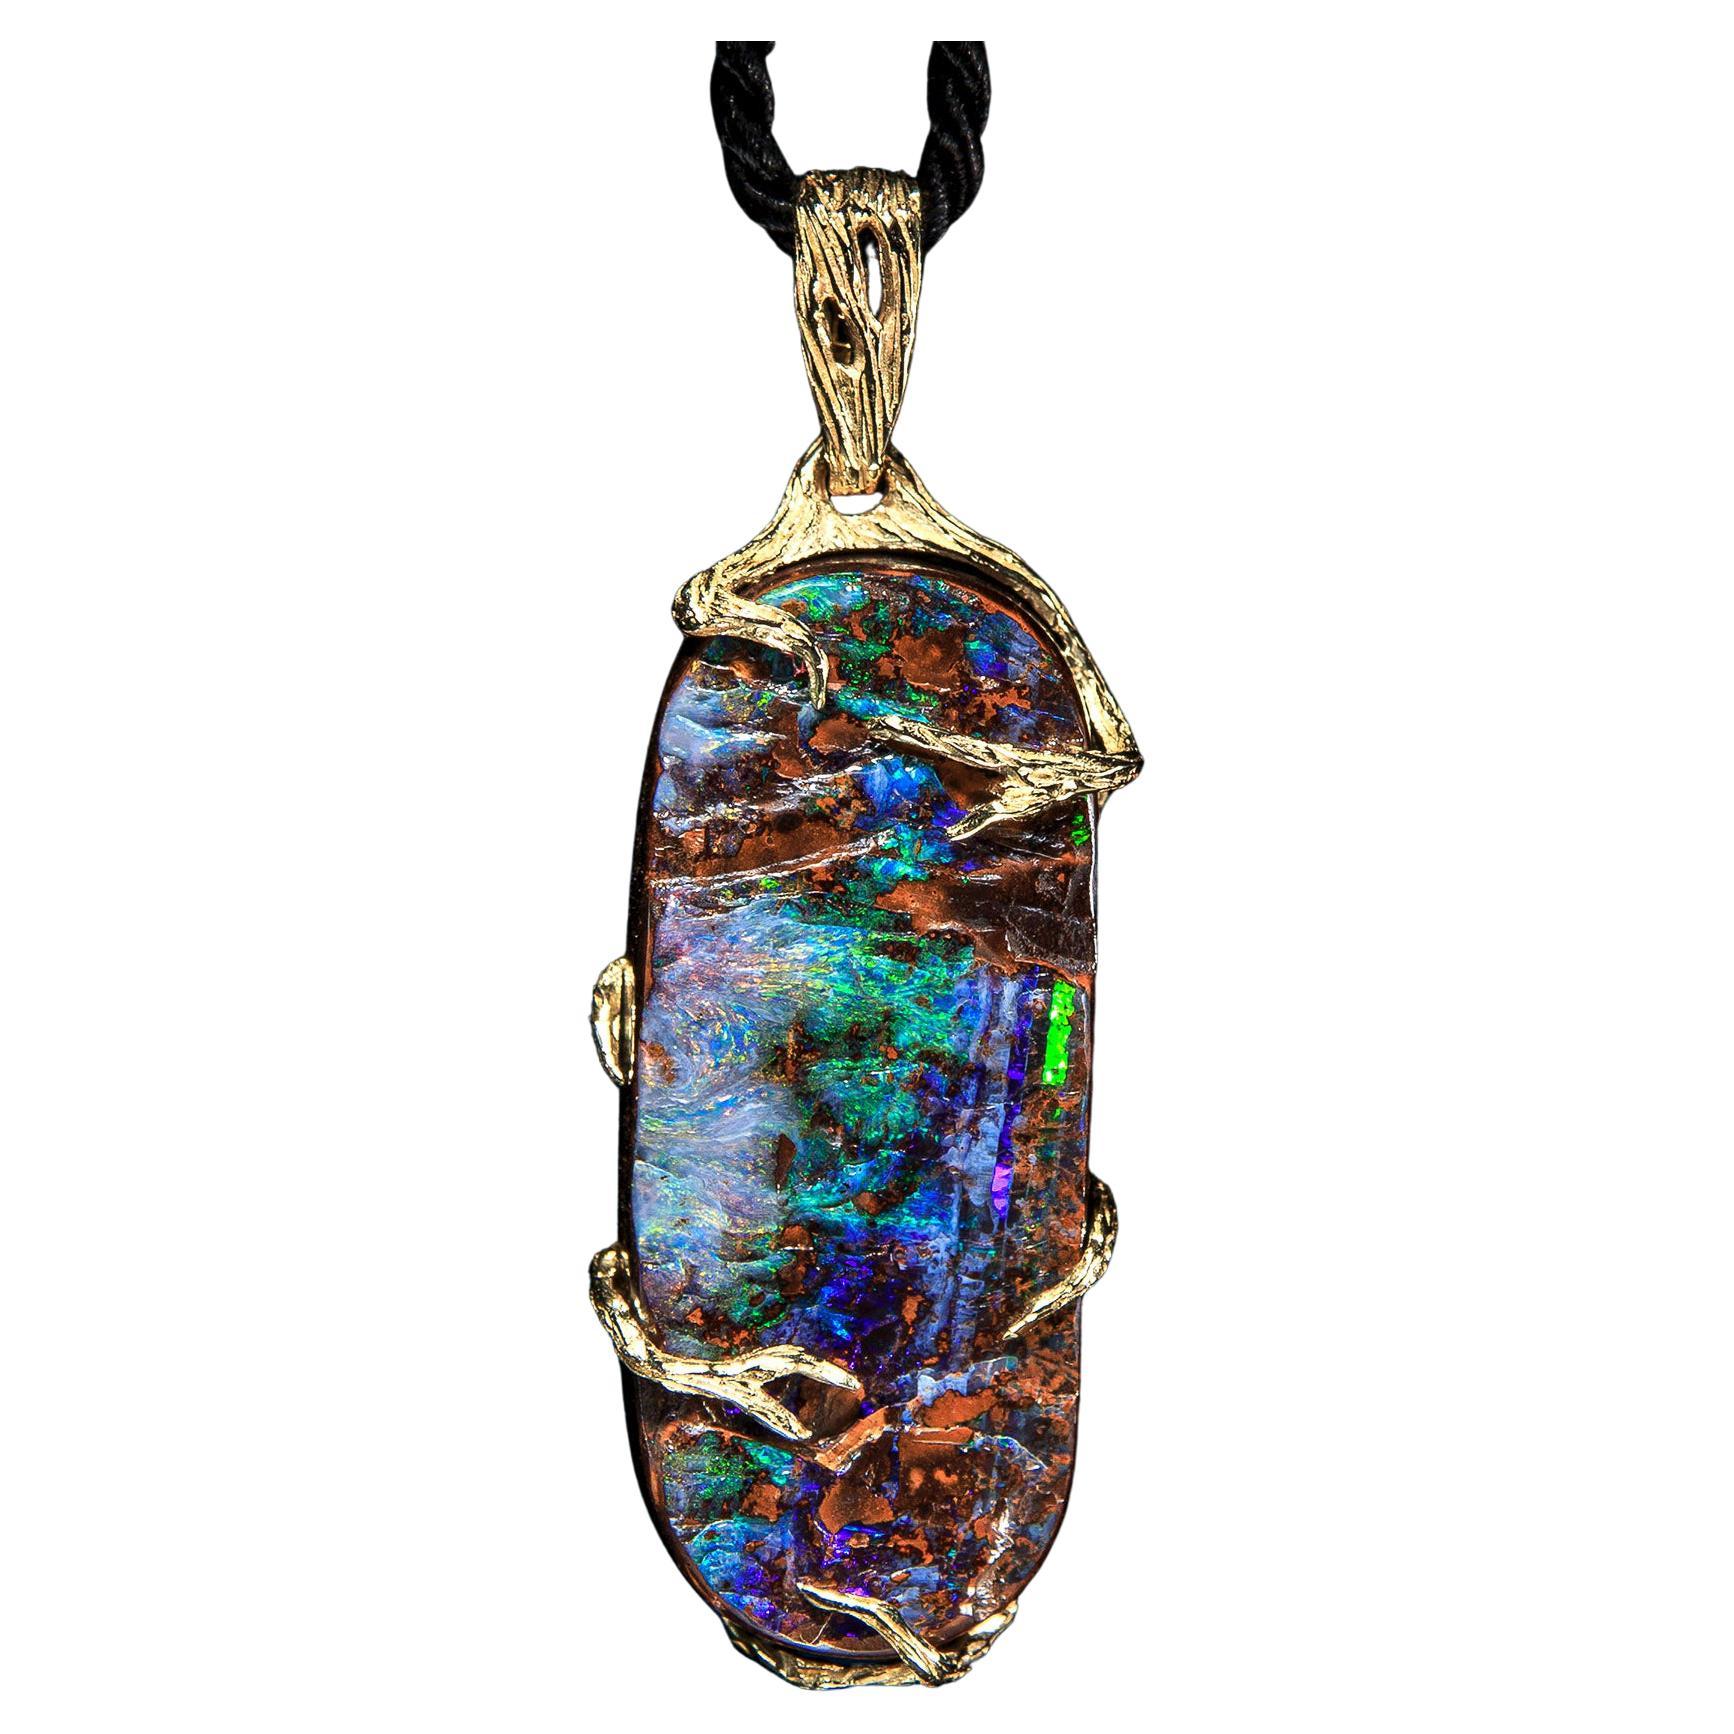 A ROYAL WHISPER 18KT YELLOW GOLD PLATED AUSTRALIAN OPAL NECKLACE